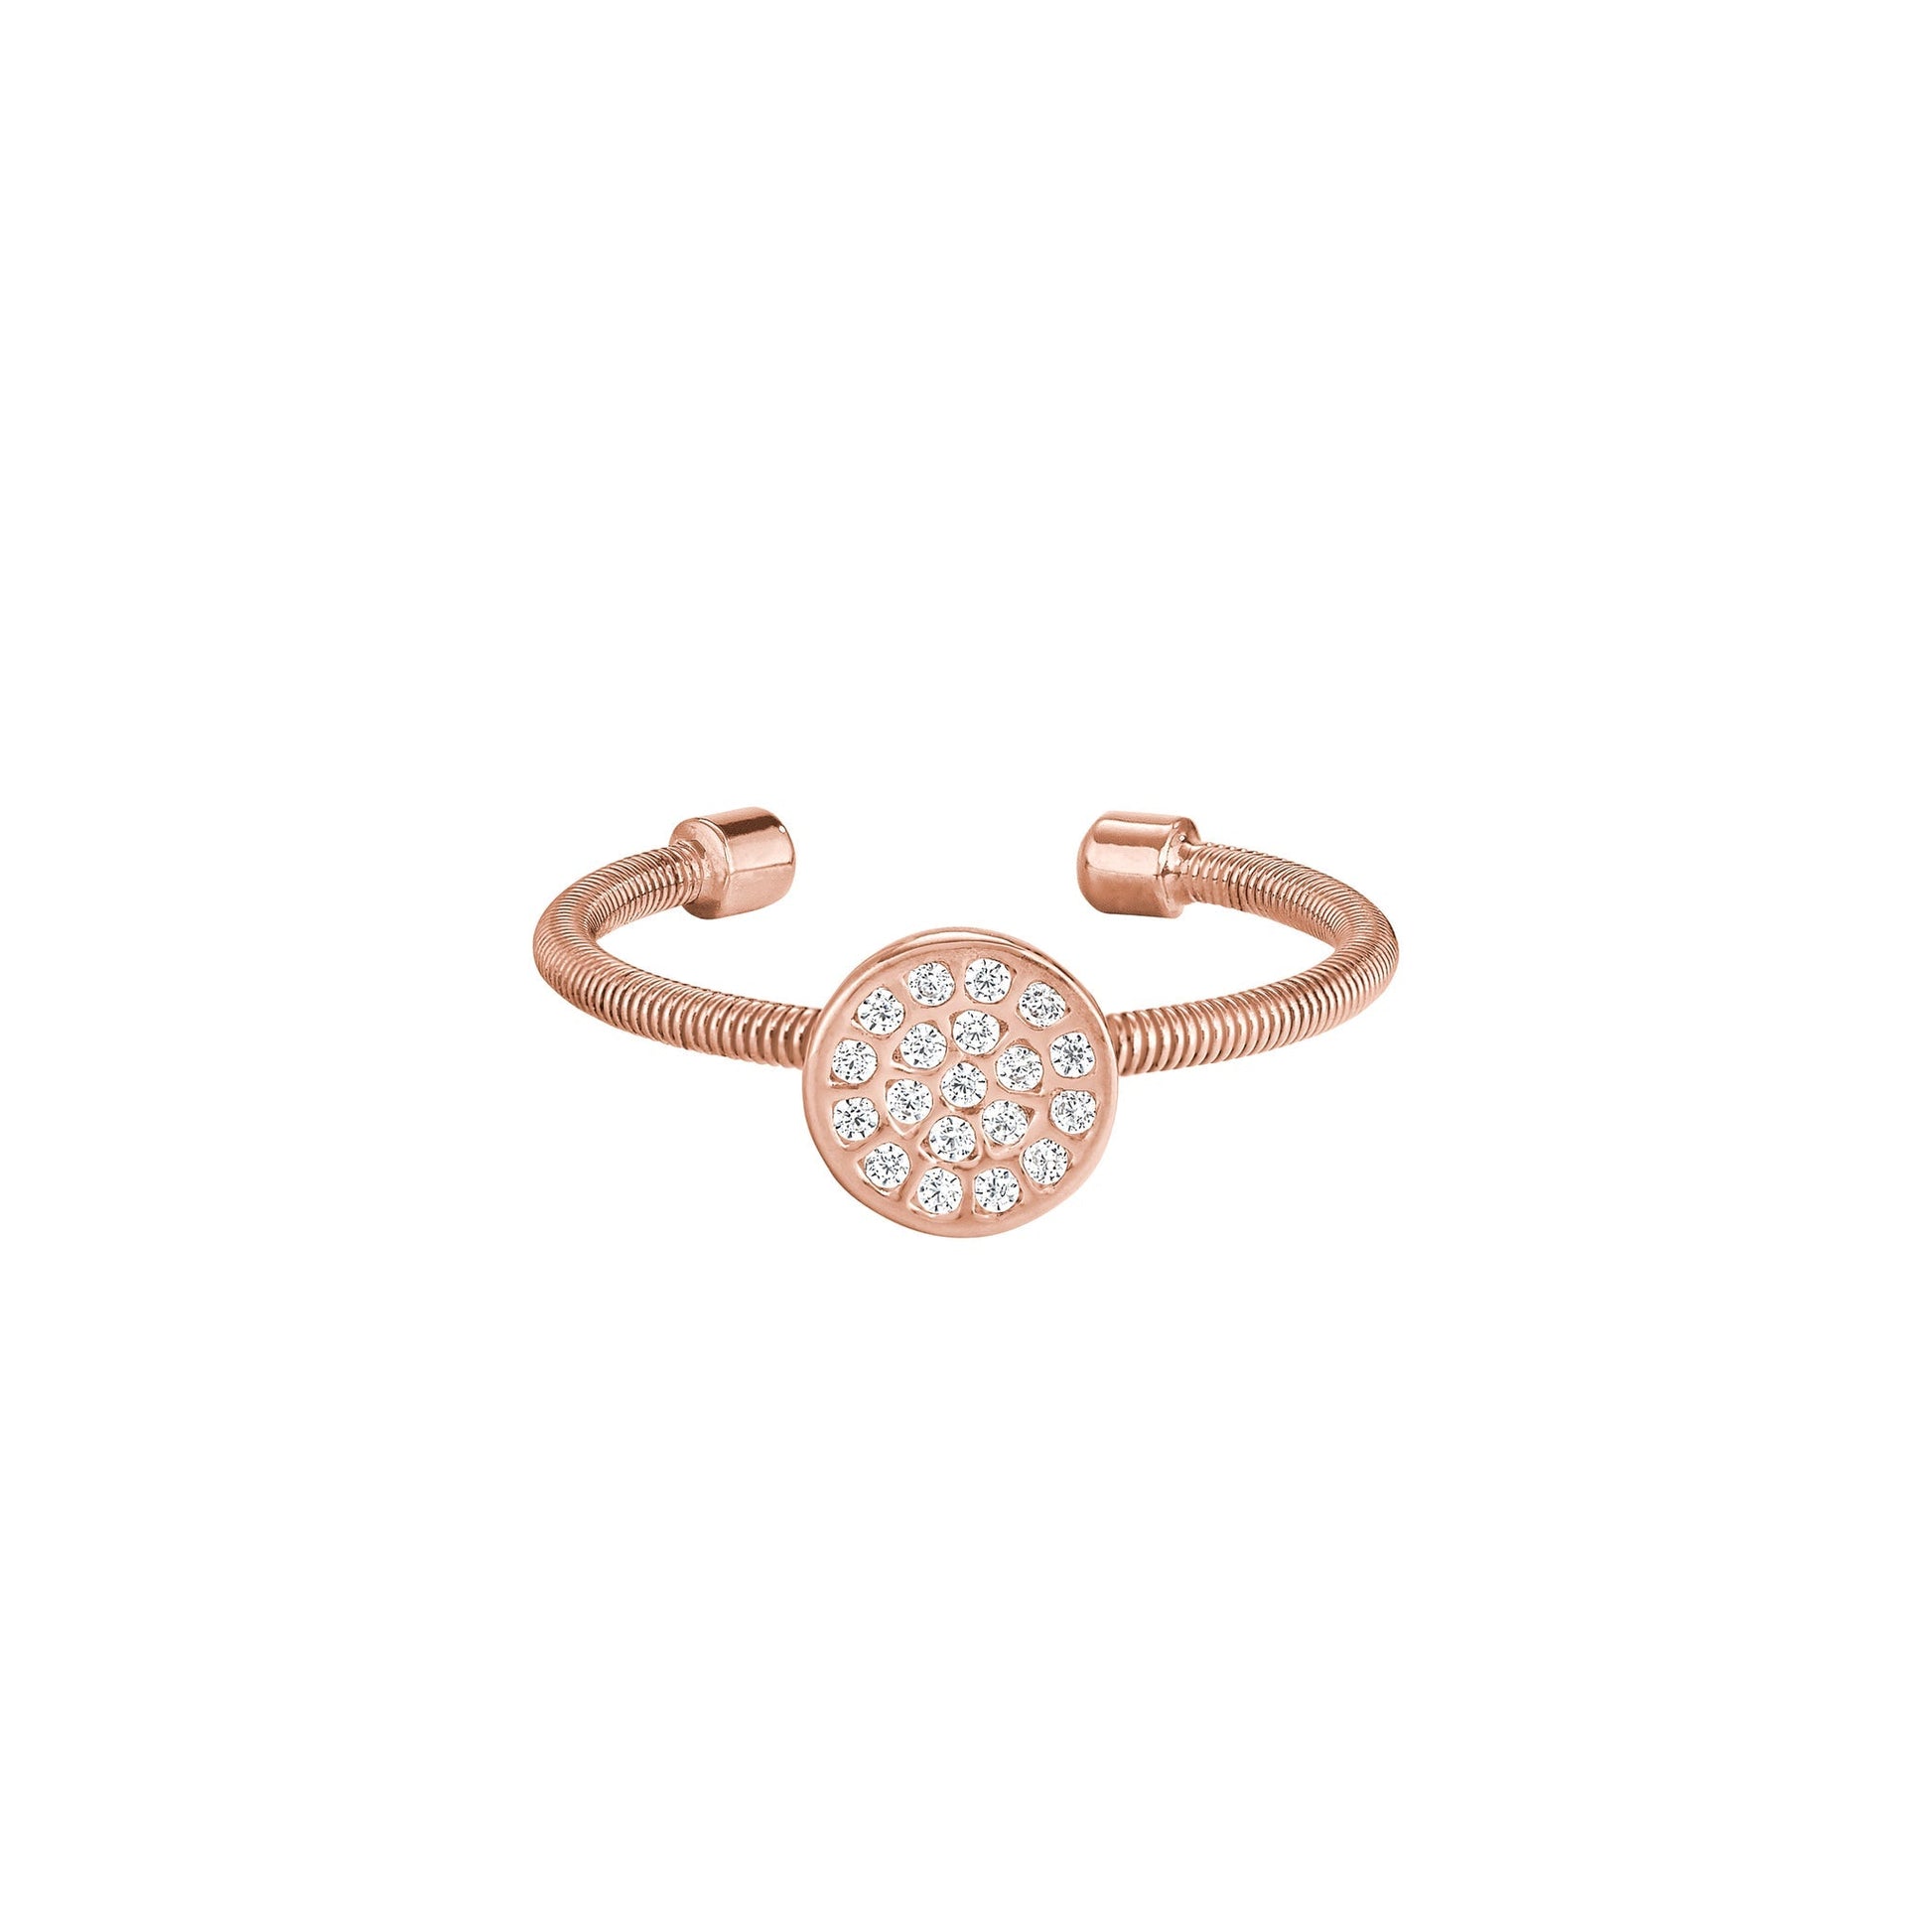 A flexible cable circle accent ring with simulated diamonds displayed on a neutral white background.